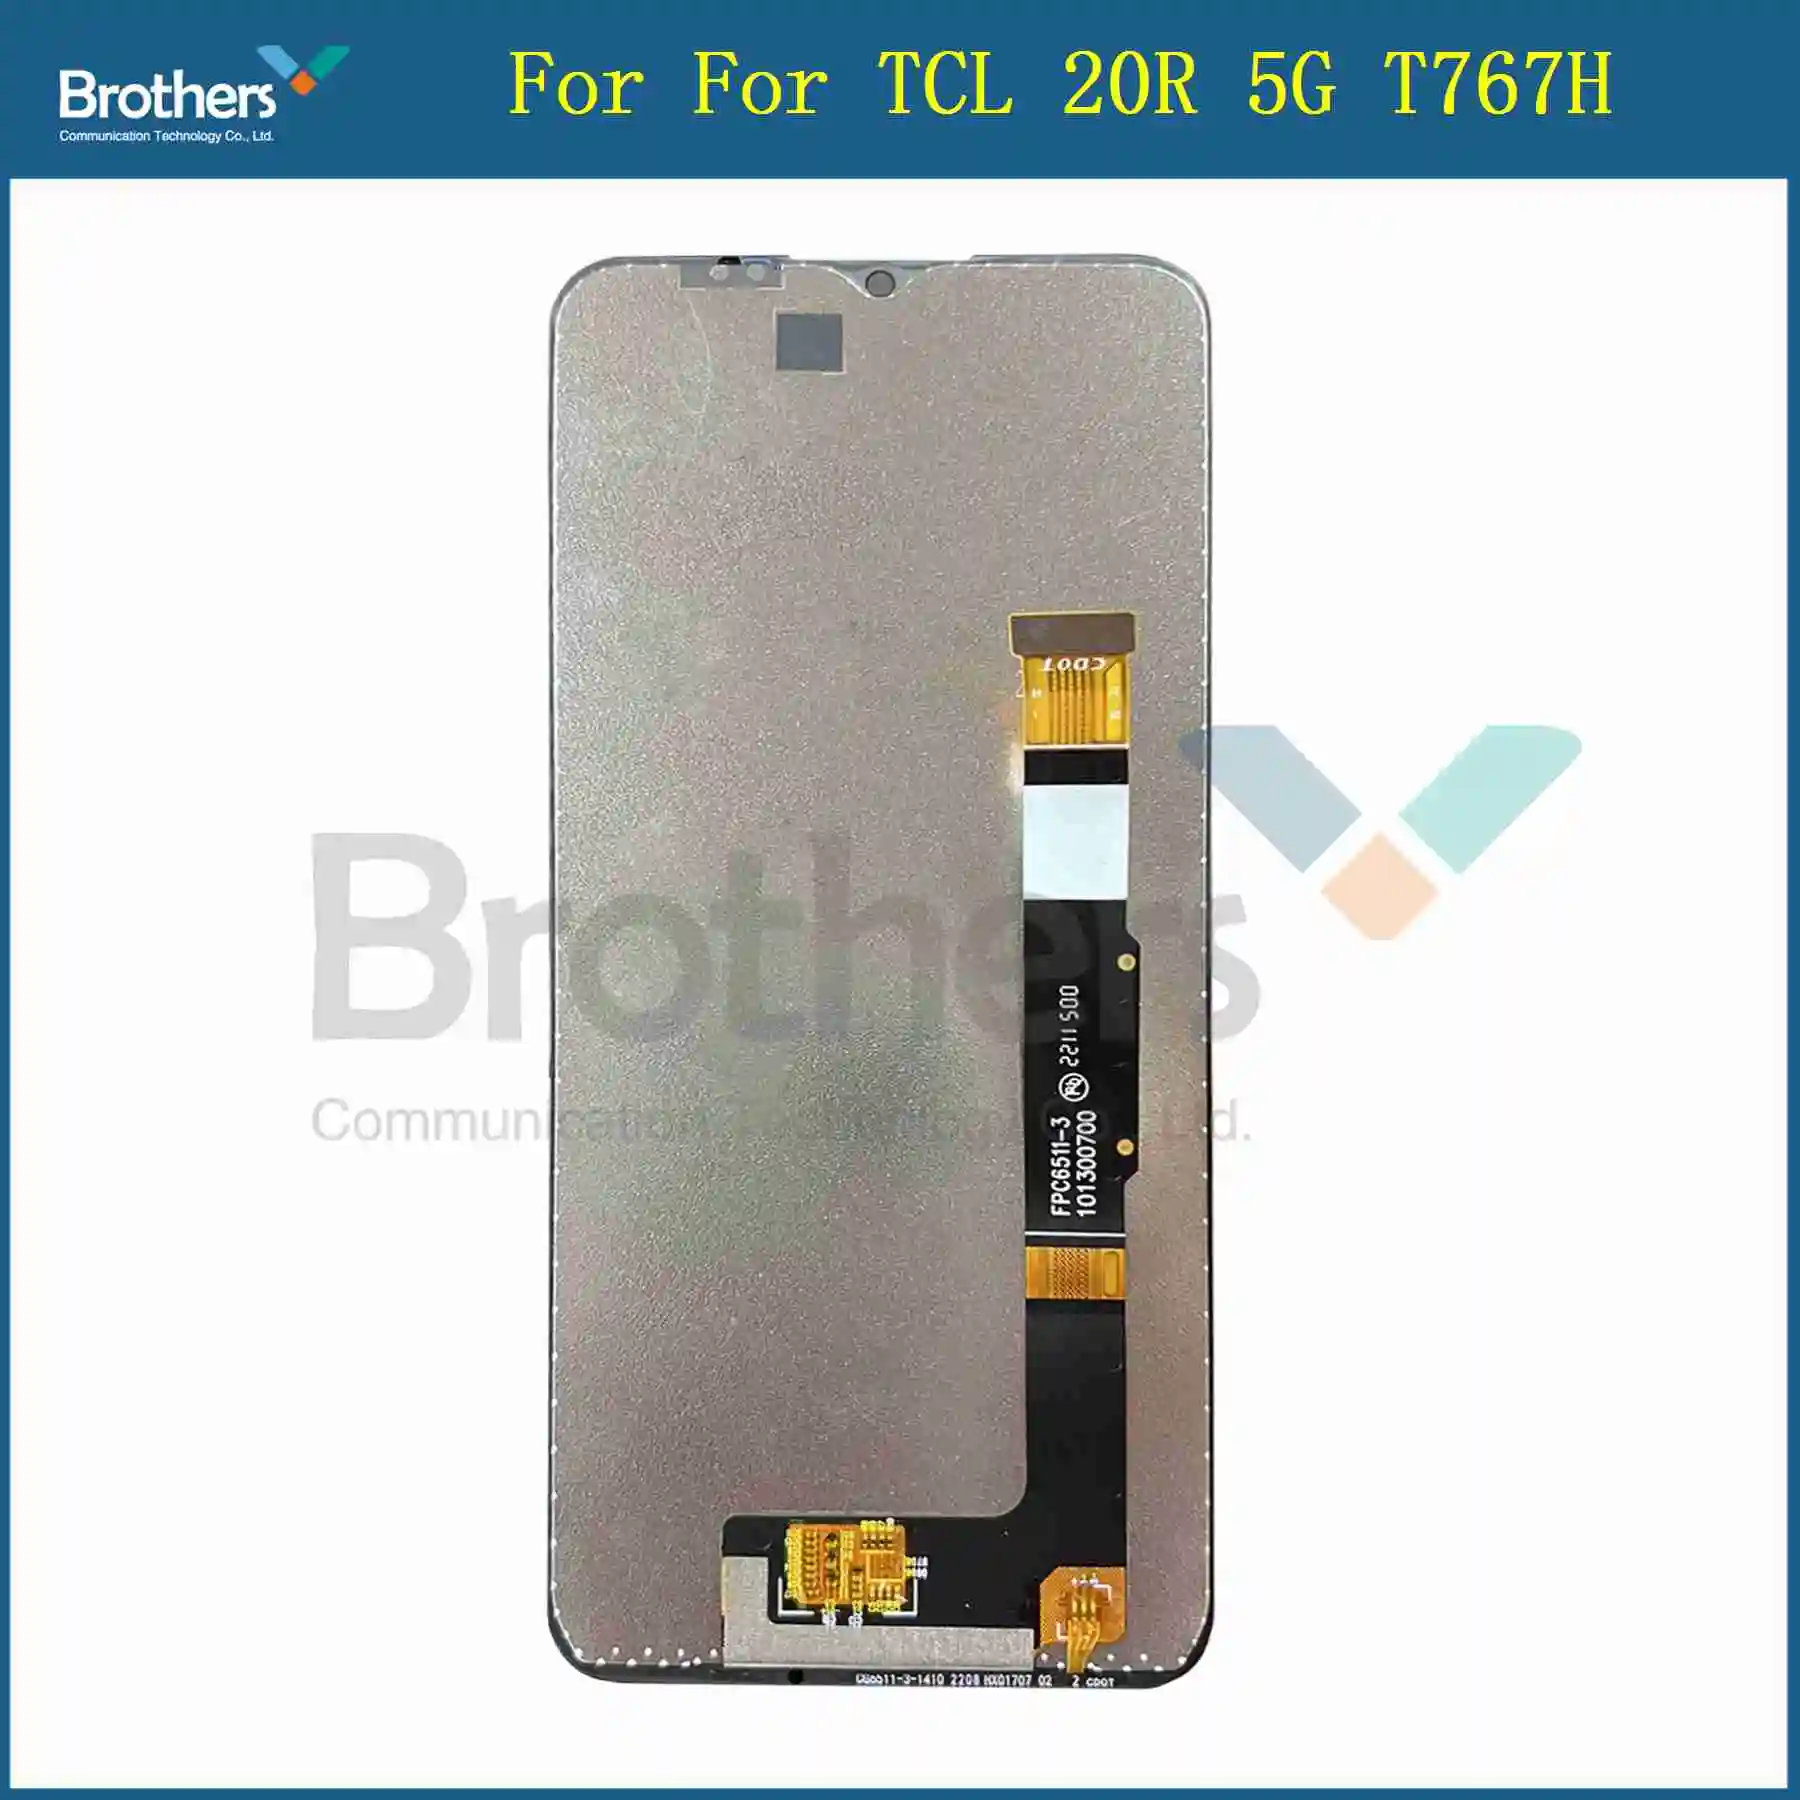 

Original Products 6.52 Inch For TCL 20R 5G T767H Smartphone Display Lcd Touch Screen Digitizer Assembly Replacement